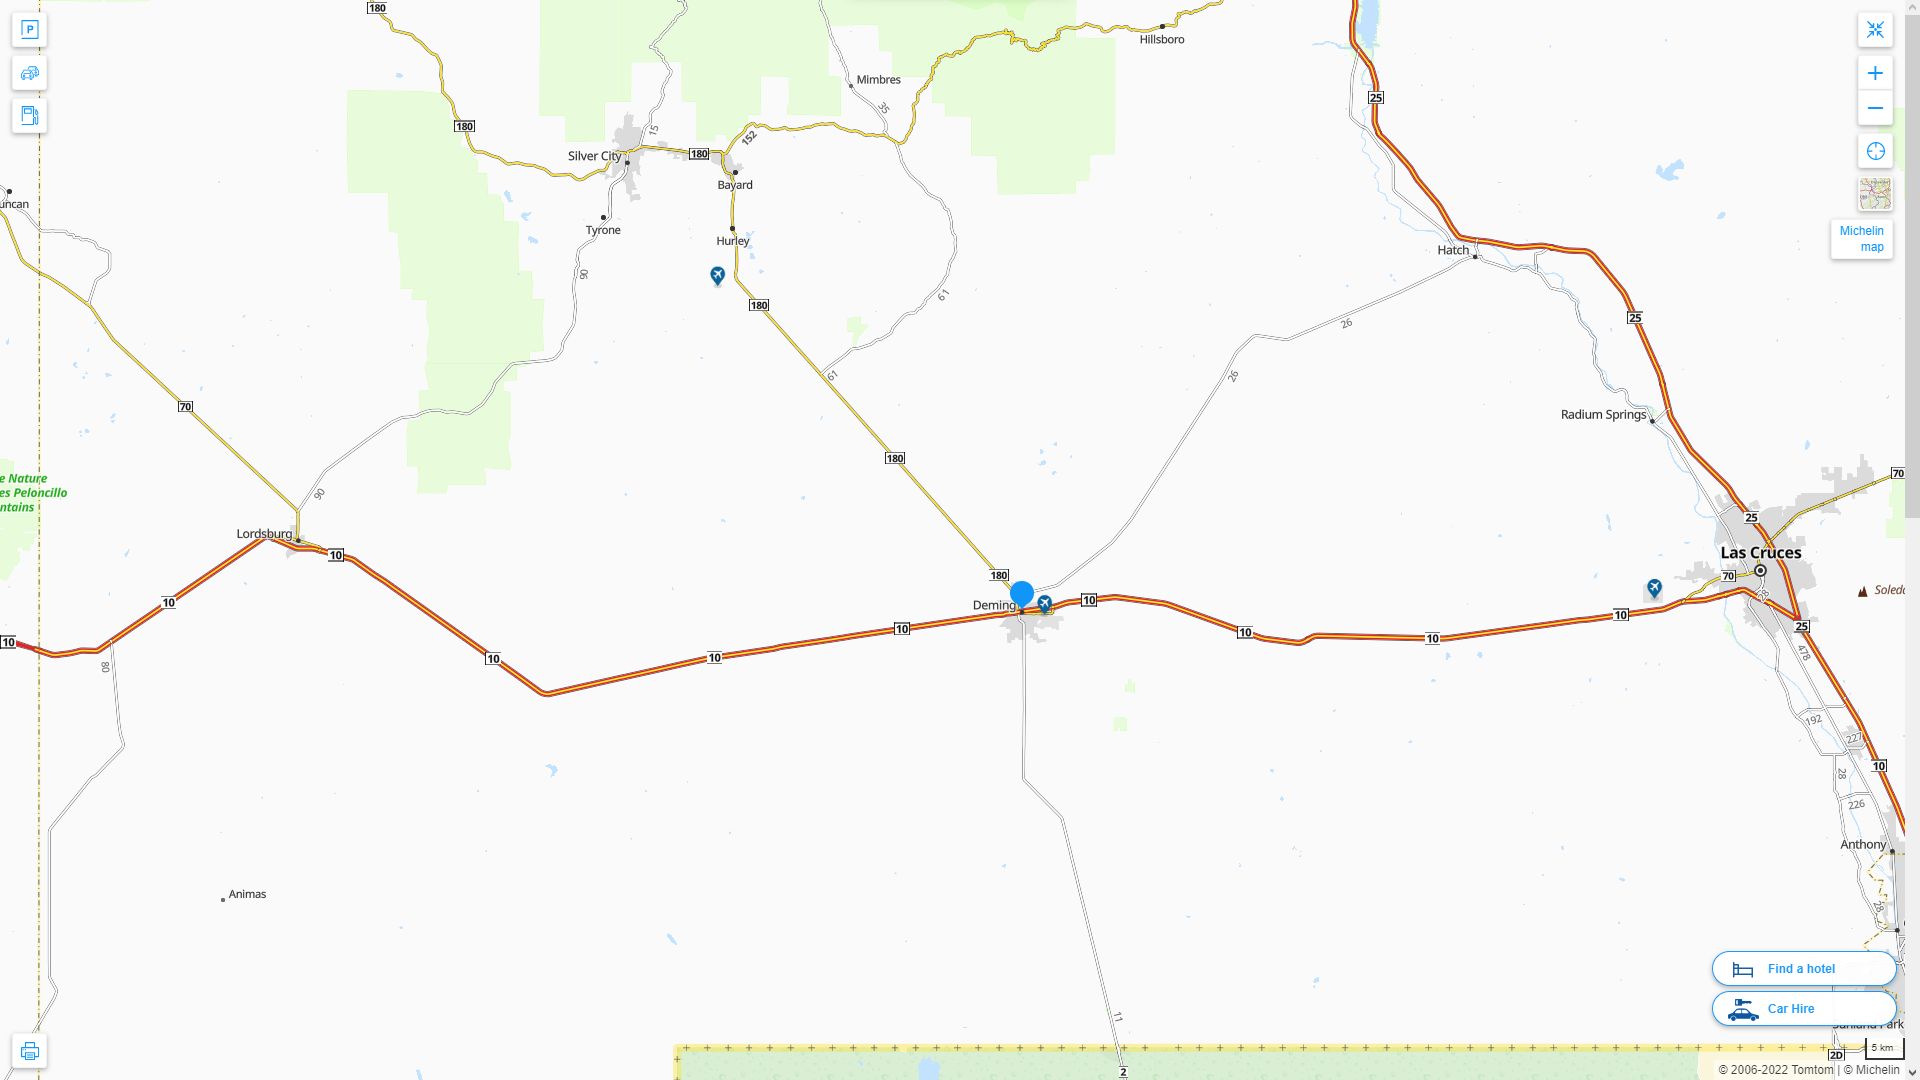 Deming New Mexico Highway and Road Map